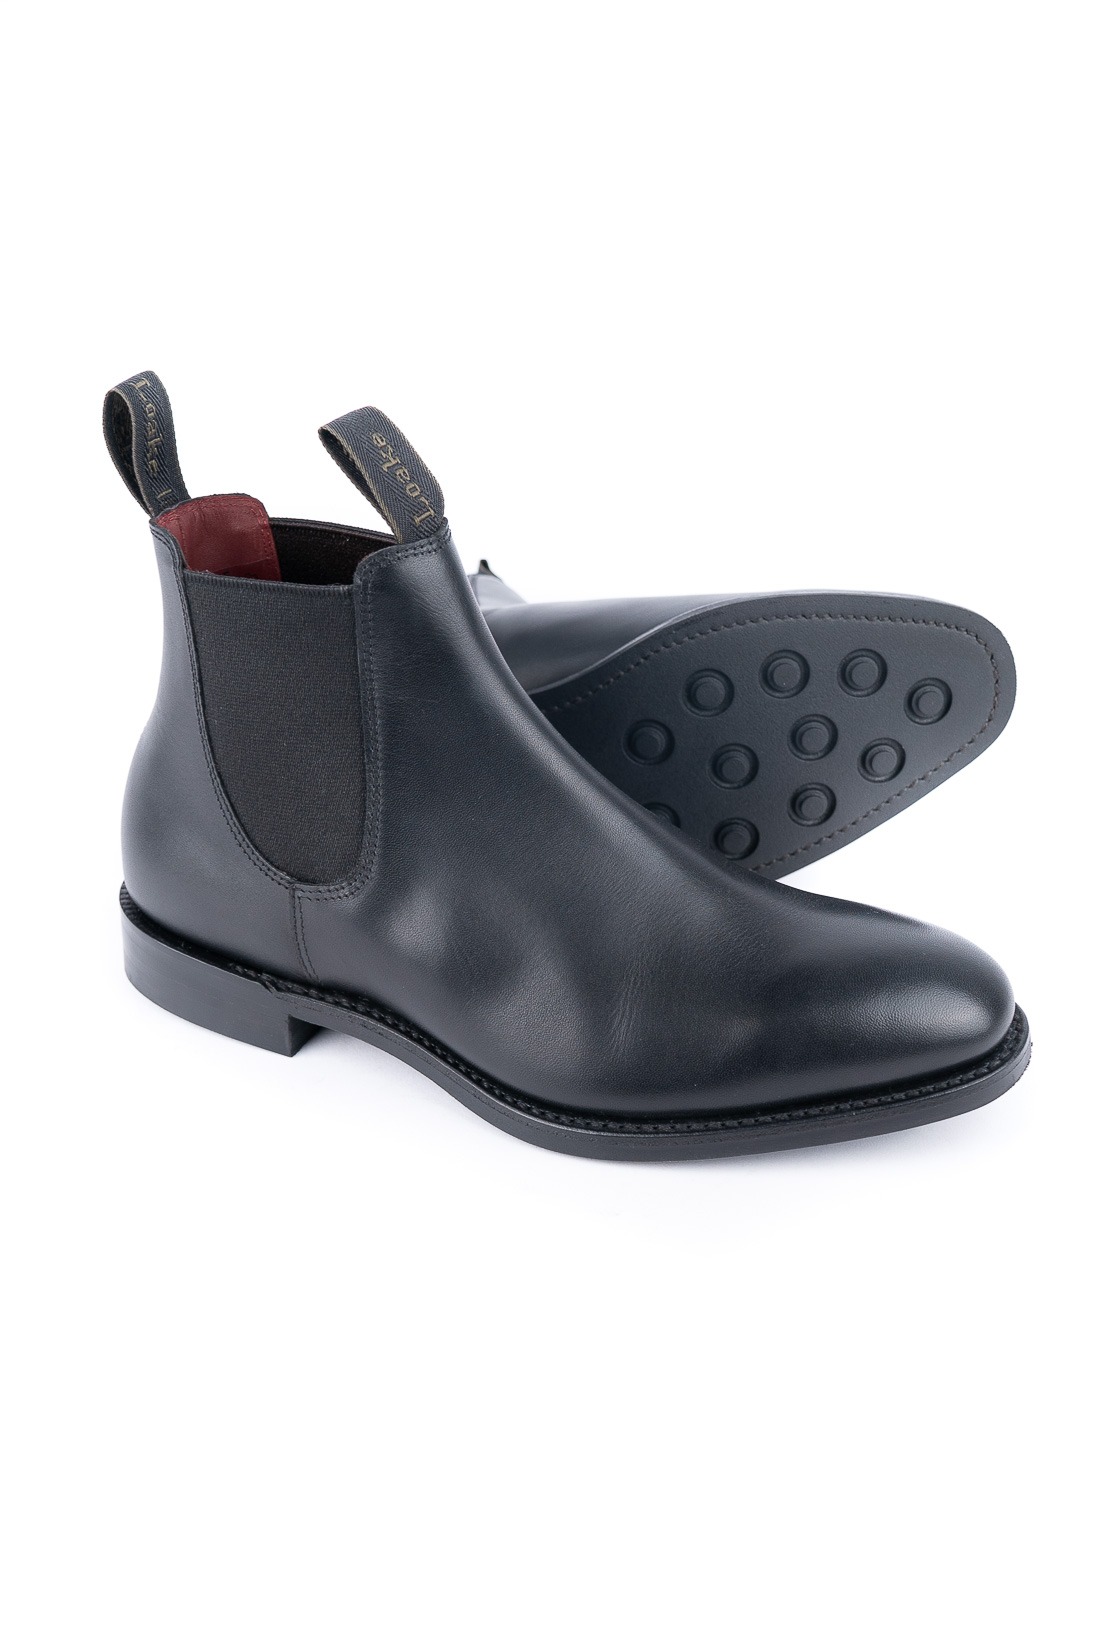 loake ladies boots